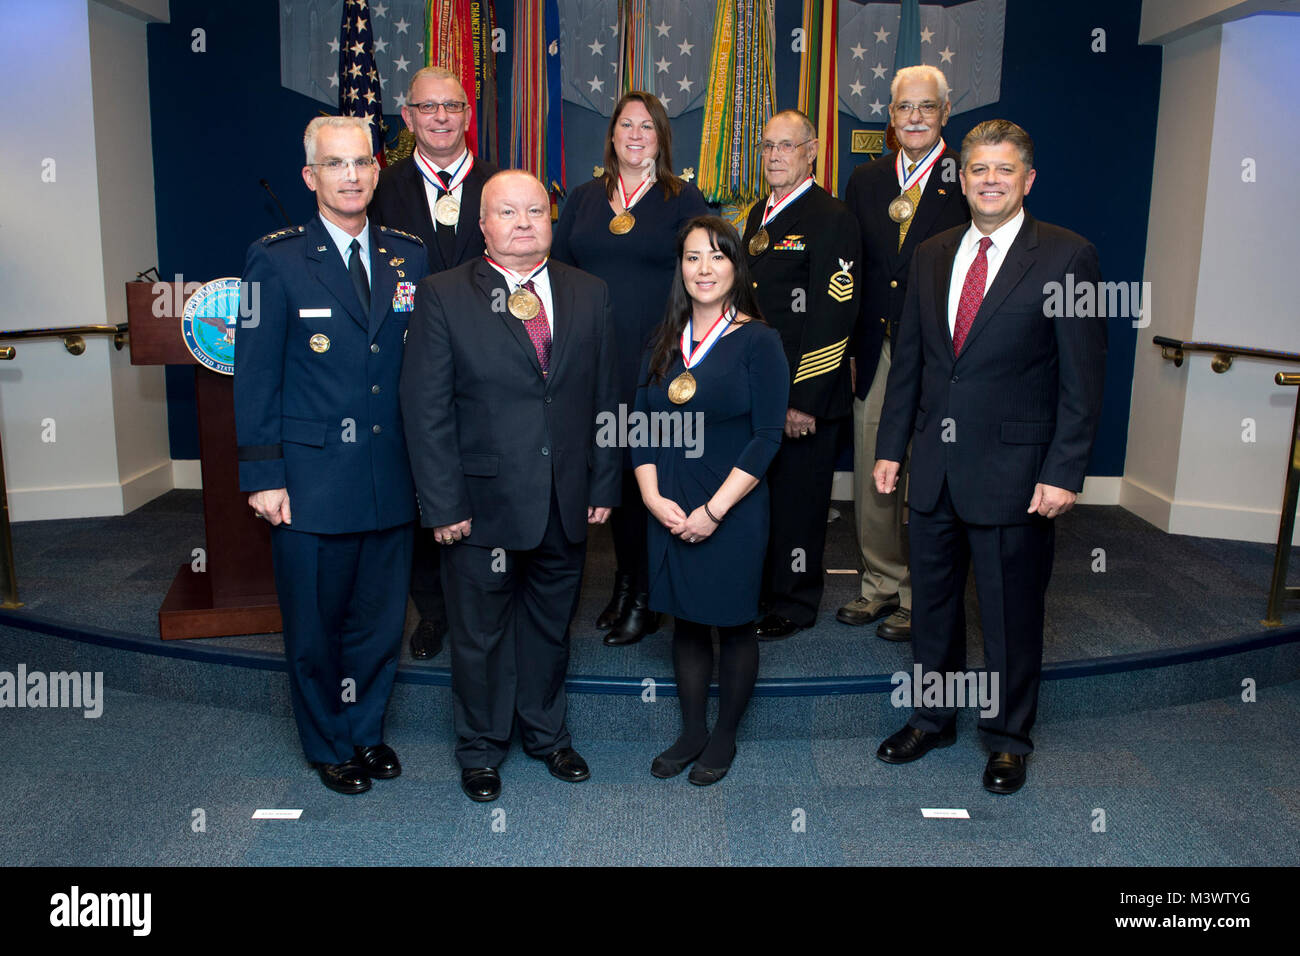 Recipients of The Spirit of Hope Award stand for a photograph with Vice Chairman of the Joint Chiefs of Staff Gen. Paul Selva, front left, and Michael Rhodes, director of administration at the Office of the Deputy Chief Management Officer, front right, after the awards presentation at the Pentagon in Arlington, Va. Oct. 26, 2017. The recipients are in front from left Kevin Ou and Jennifer Correla, and in back from left, Robert Irvine, Ann O’Connor of Trees for Troops, Retired Chief Petty Officer Jim Marshall, and Richard Stone of Special Forces Home for Christmas Fund. 171026-D-DB155-007 by Do Stock Photo